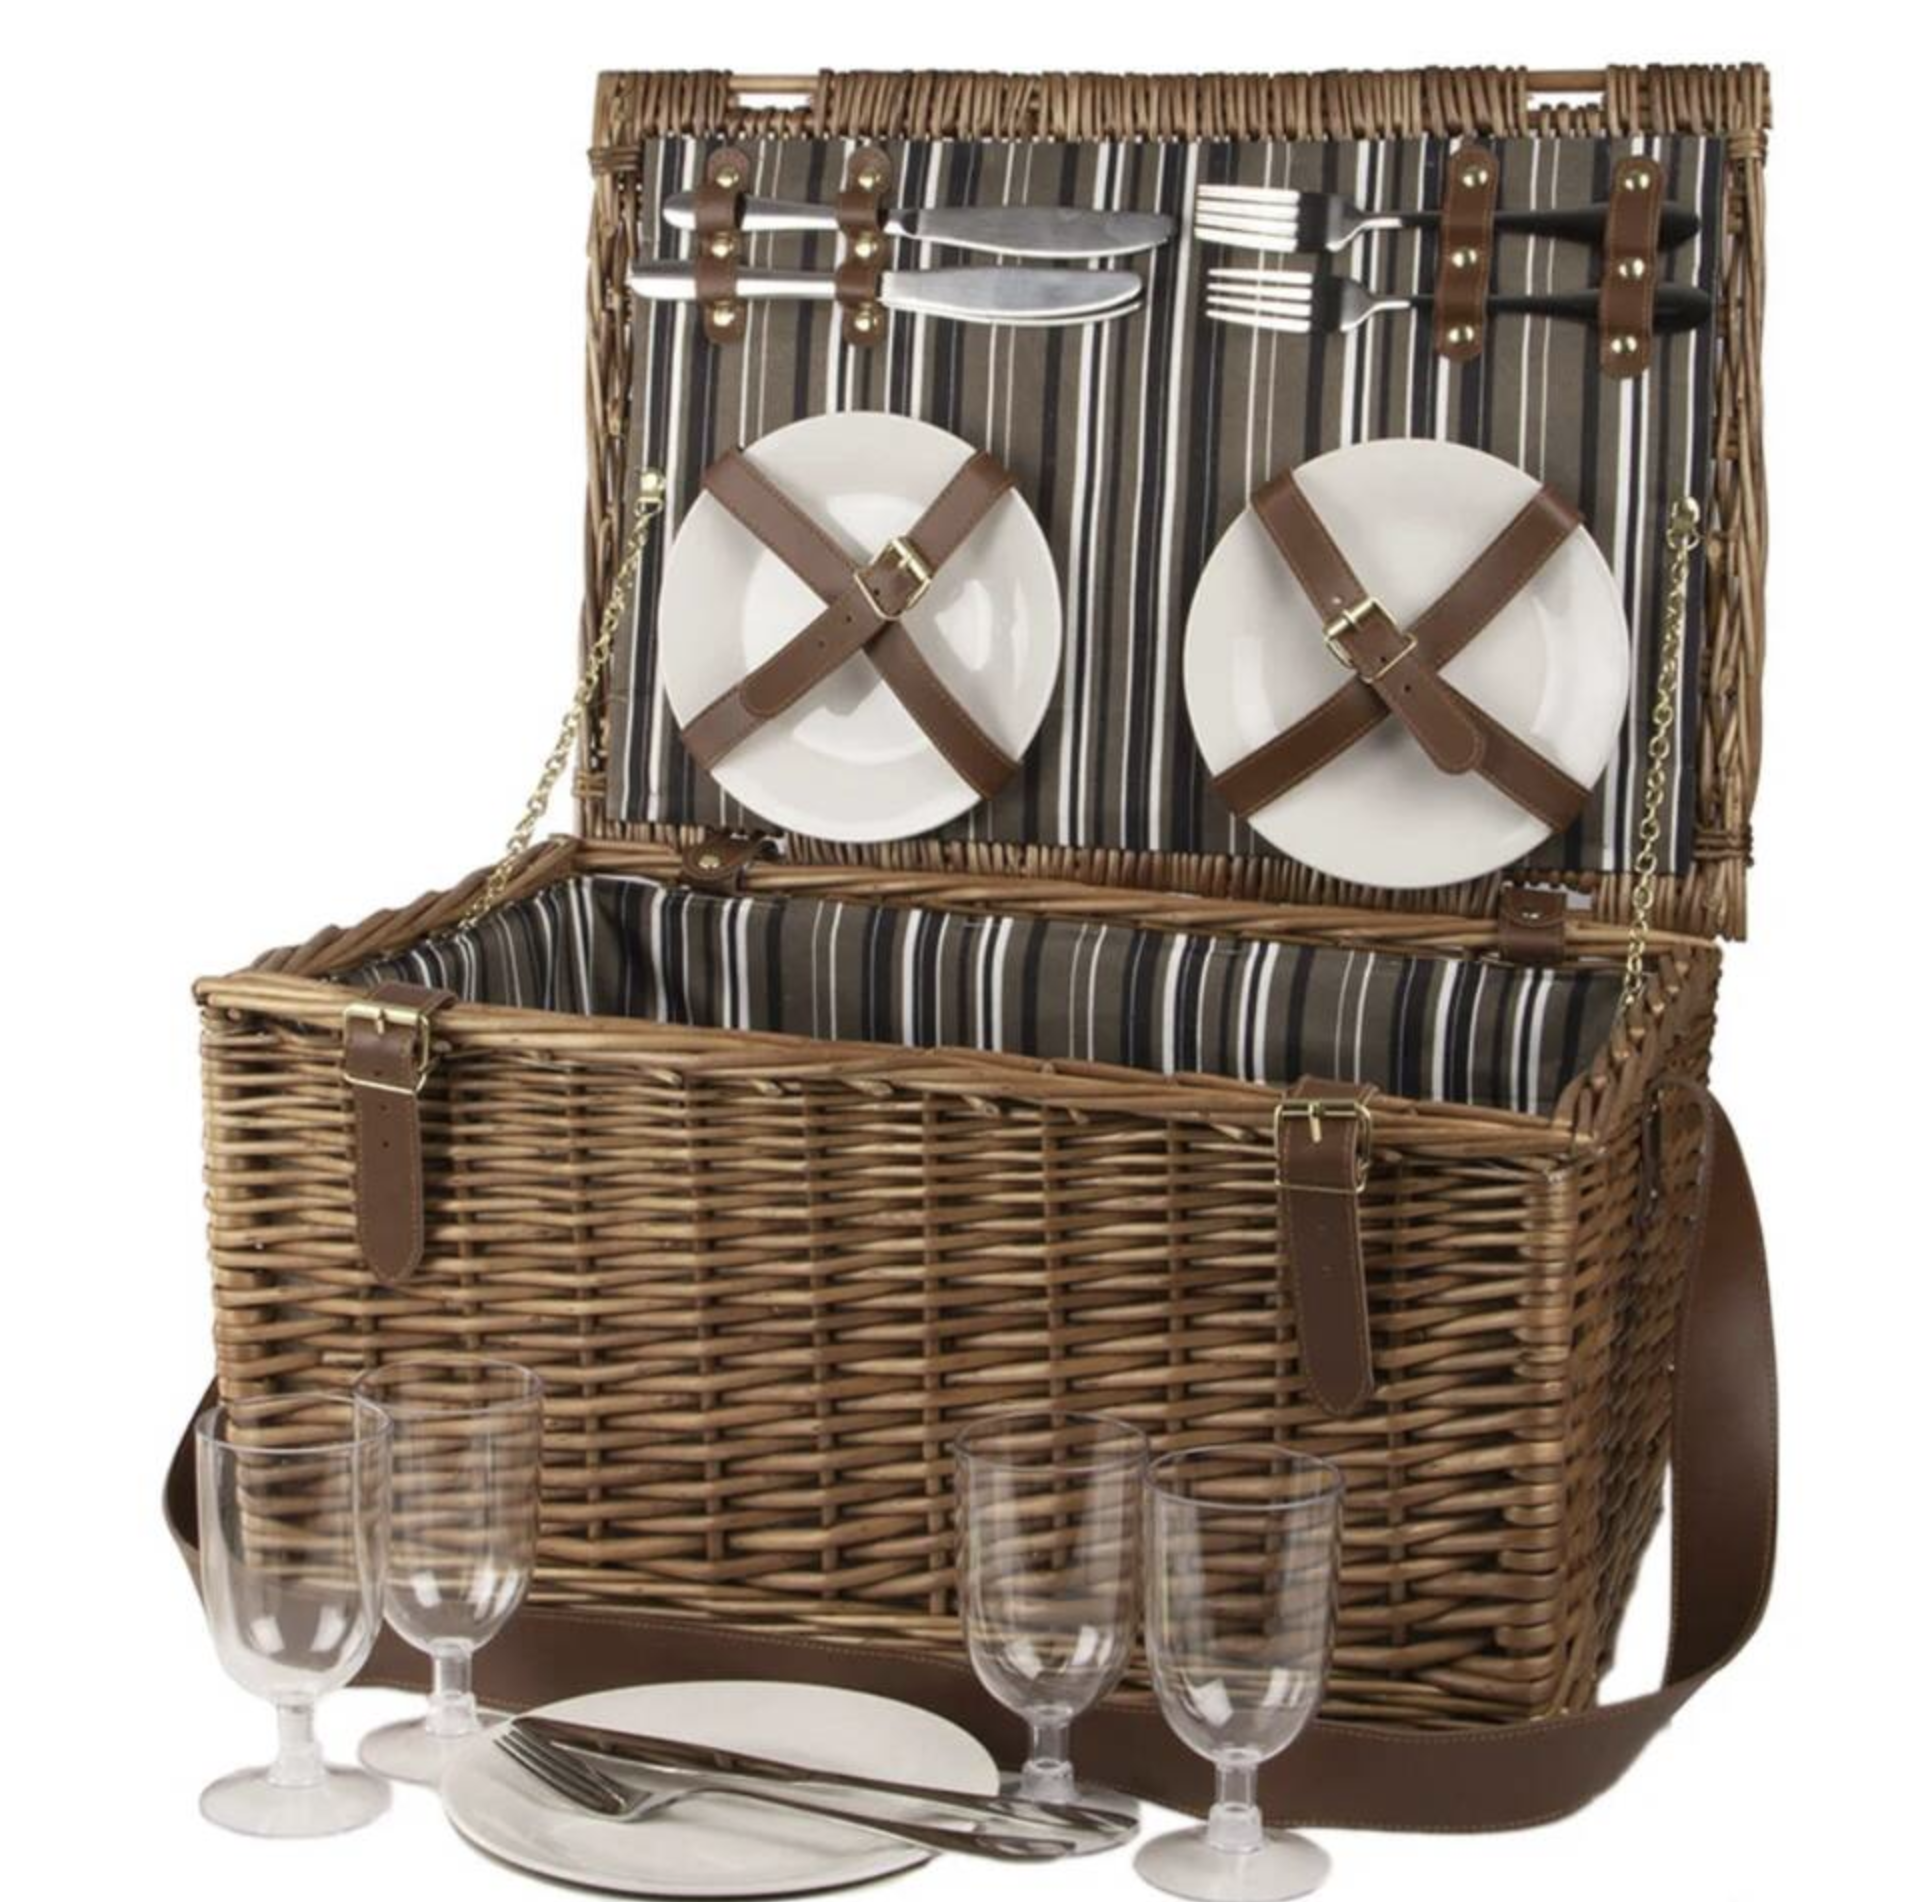 Grand Illusions Four Person Picnic Basket With Contents